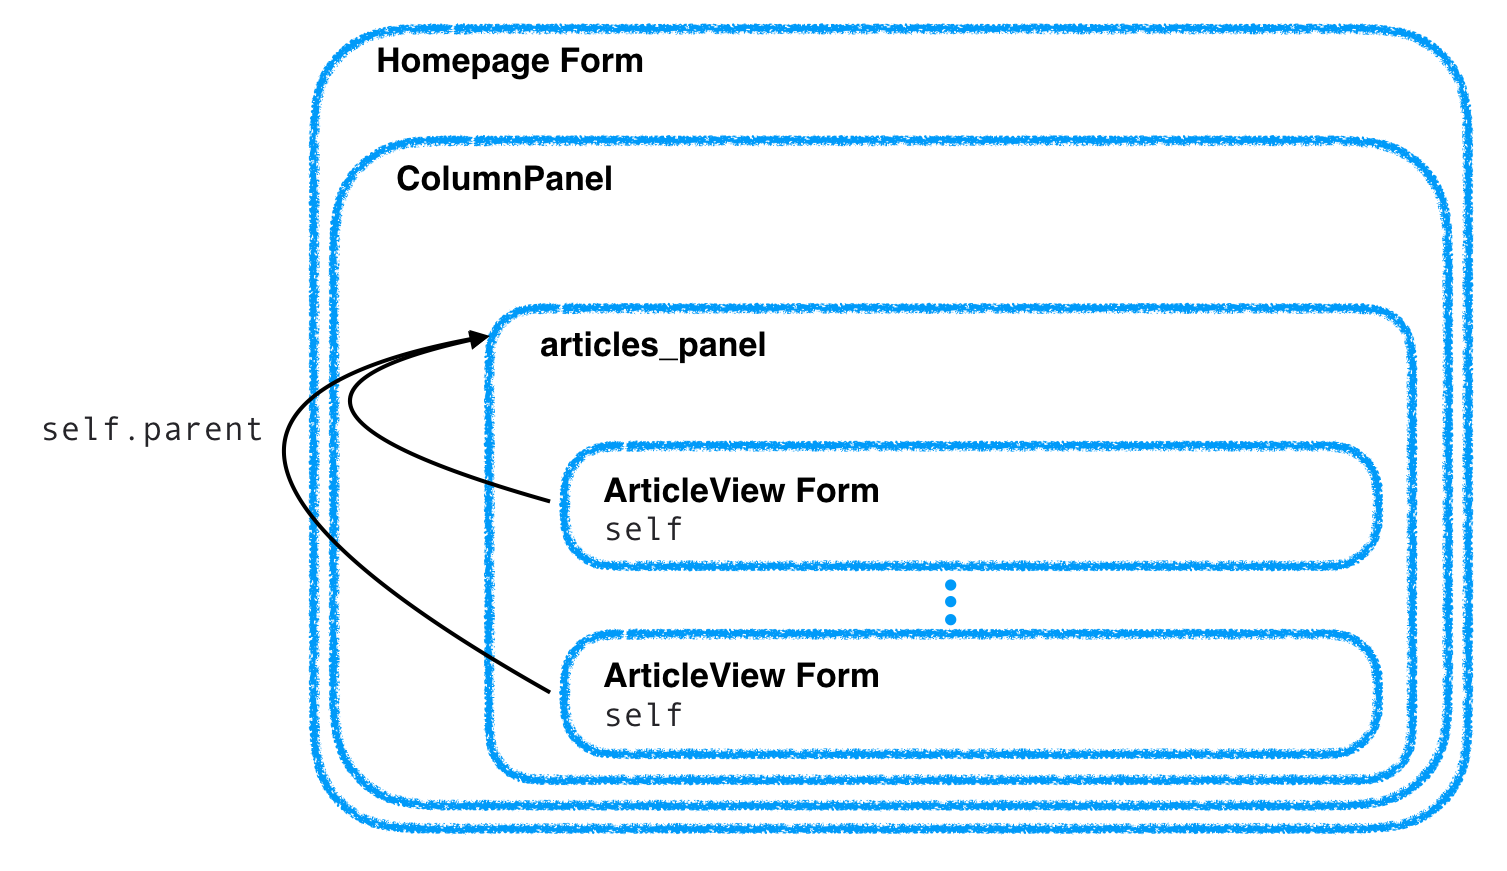 self.parent when called on the ArticleView Form refers to the articles_panel on the Homepage.